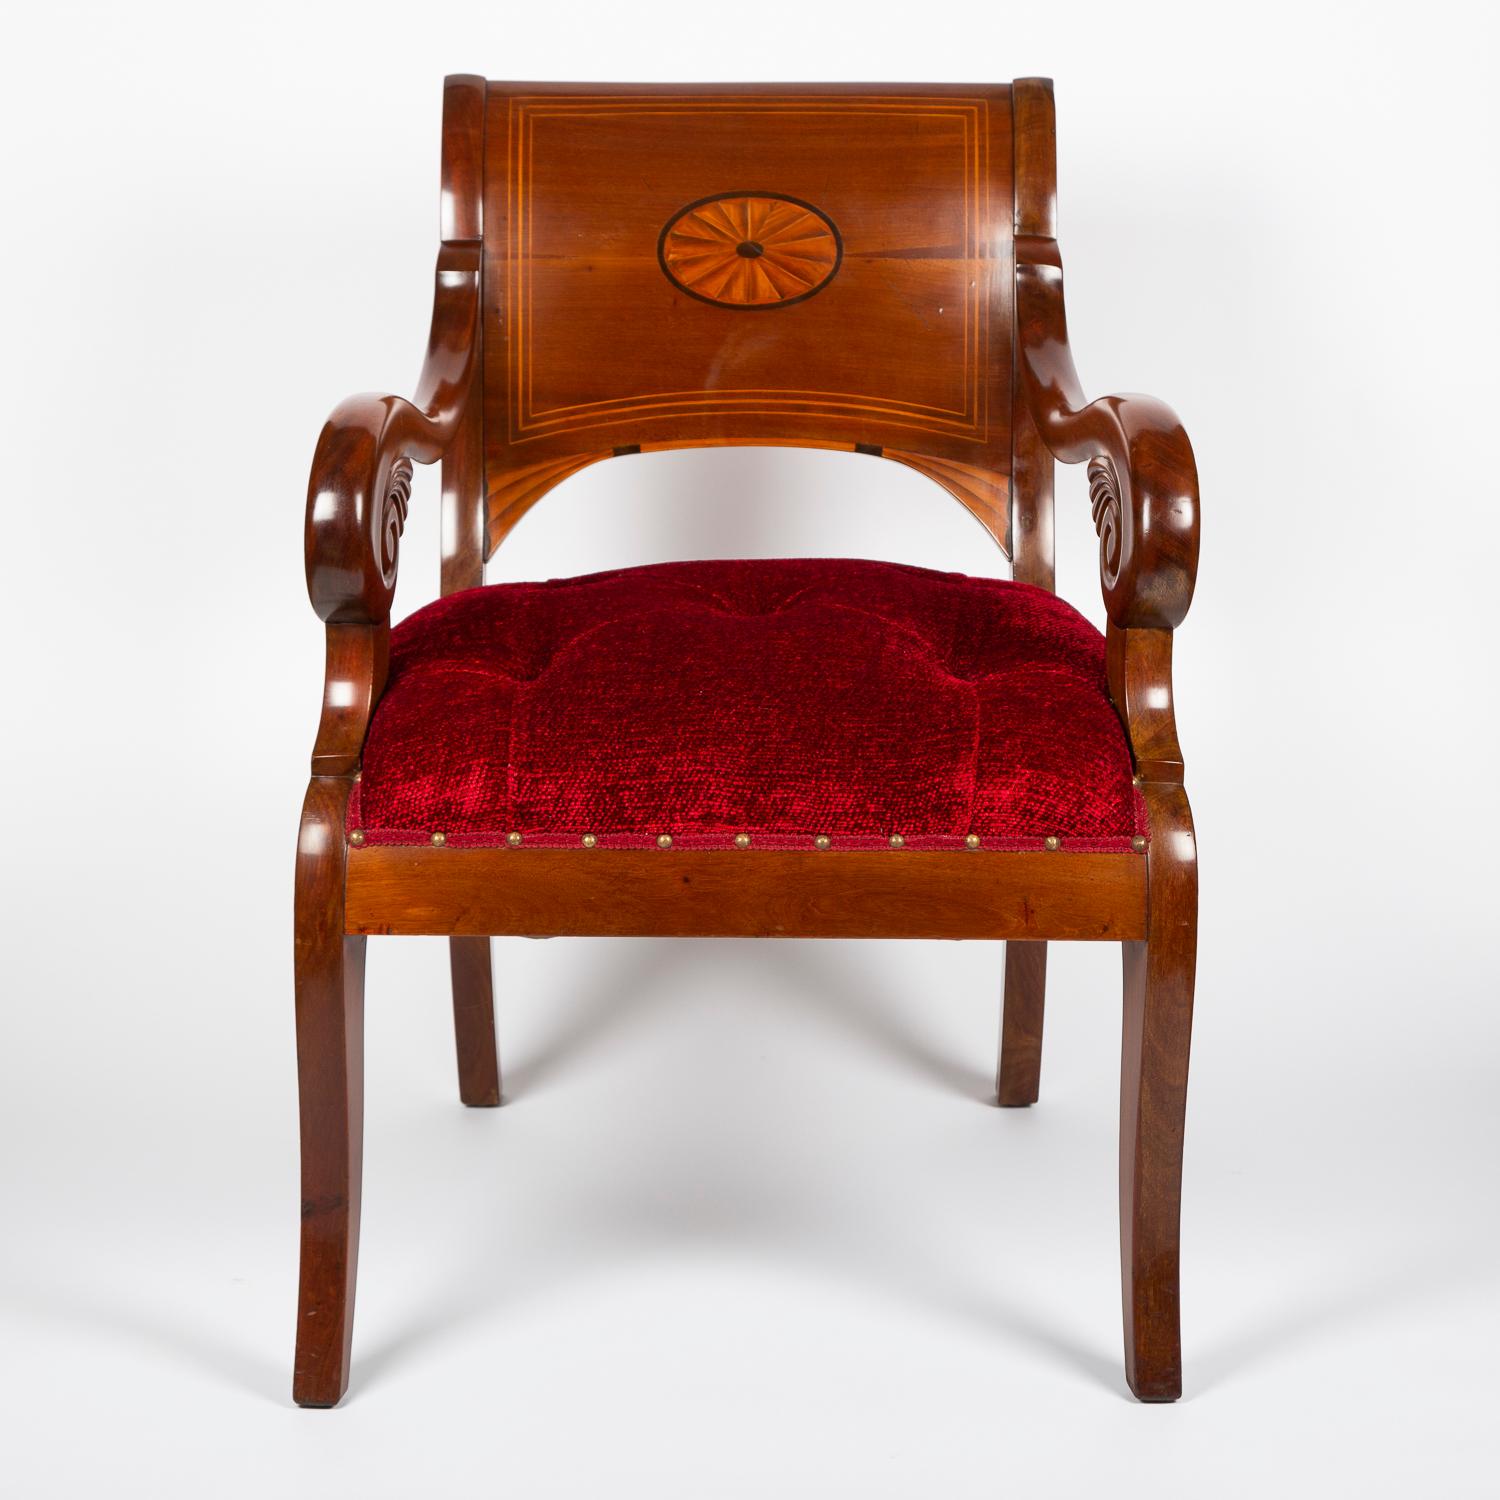 A pair of mid-19th century mahogany armchairs with carved and inlaid decoration, Denmark, circa 1860.

Upholstered in ruby red deep buttoned cotton chenille fabric.